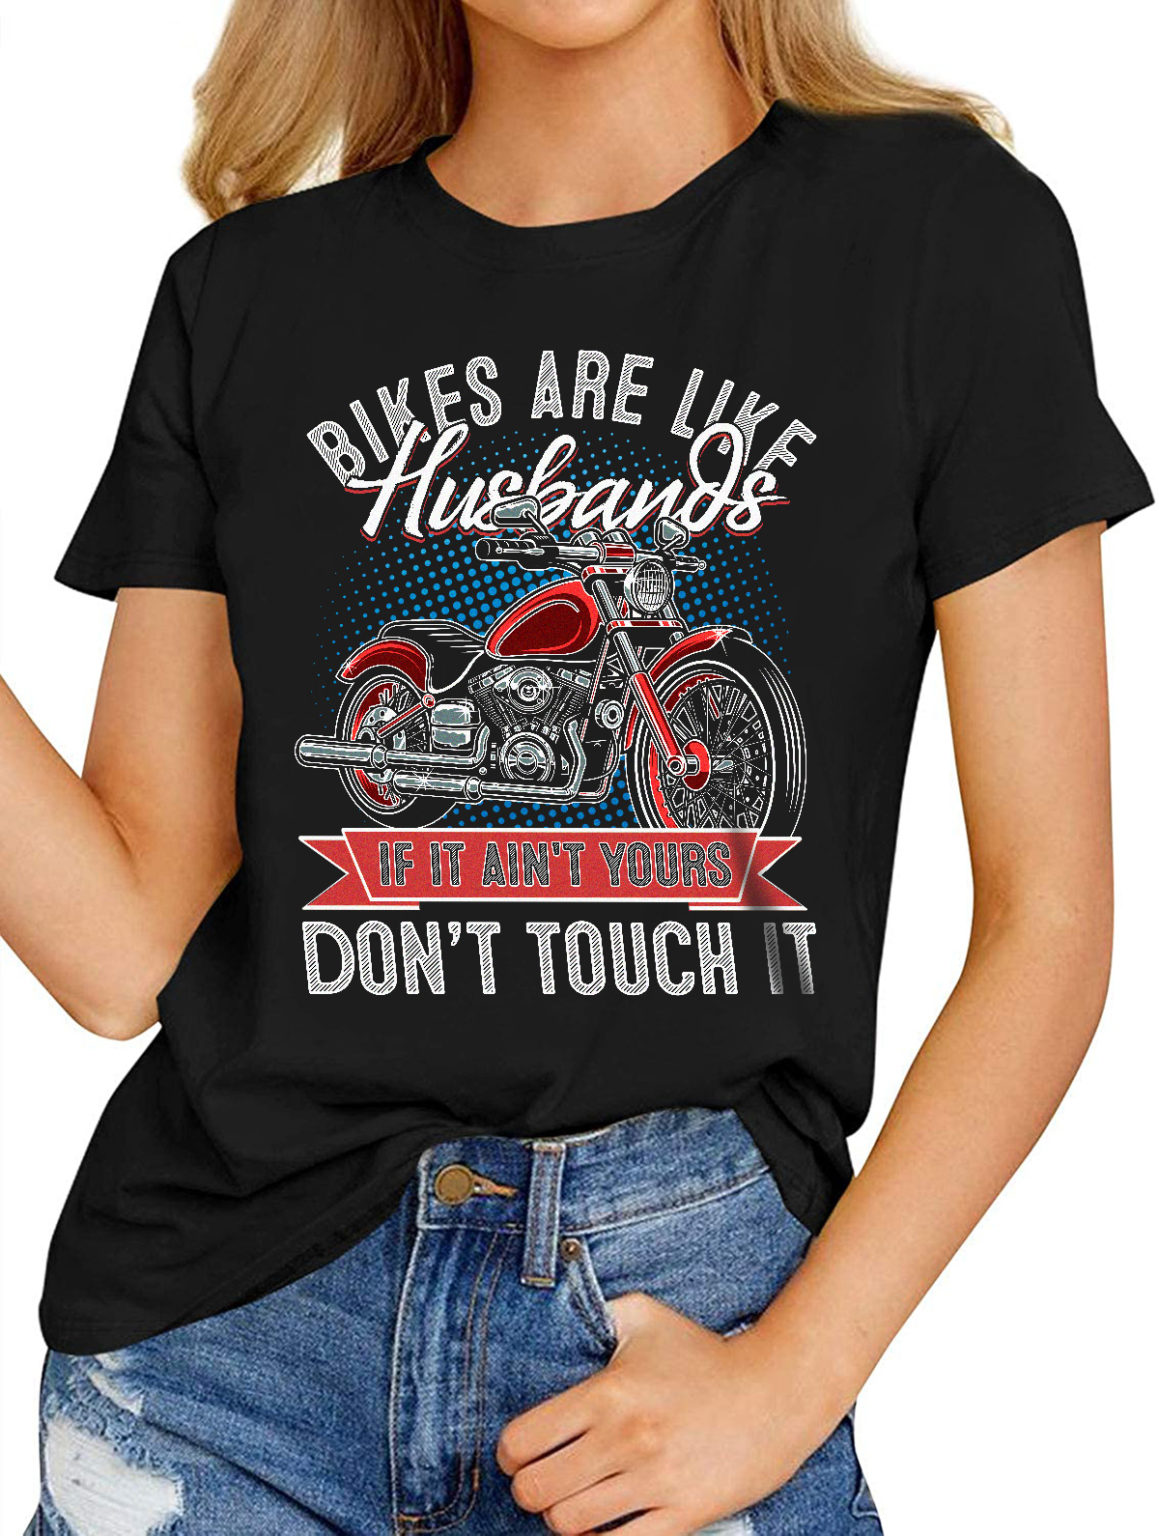 Women’s Funny T-Shirts – Bikers Are Like Husbands Don’t Touch It